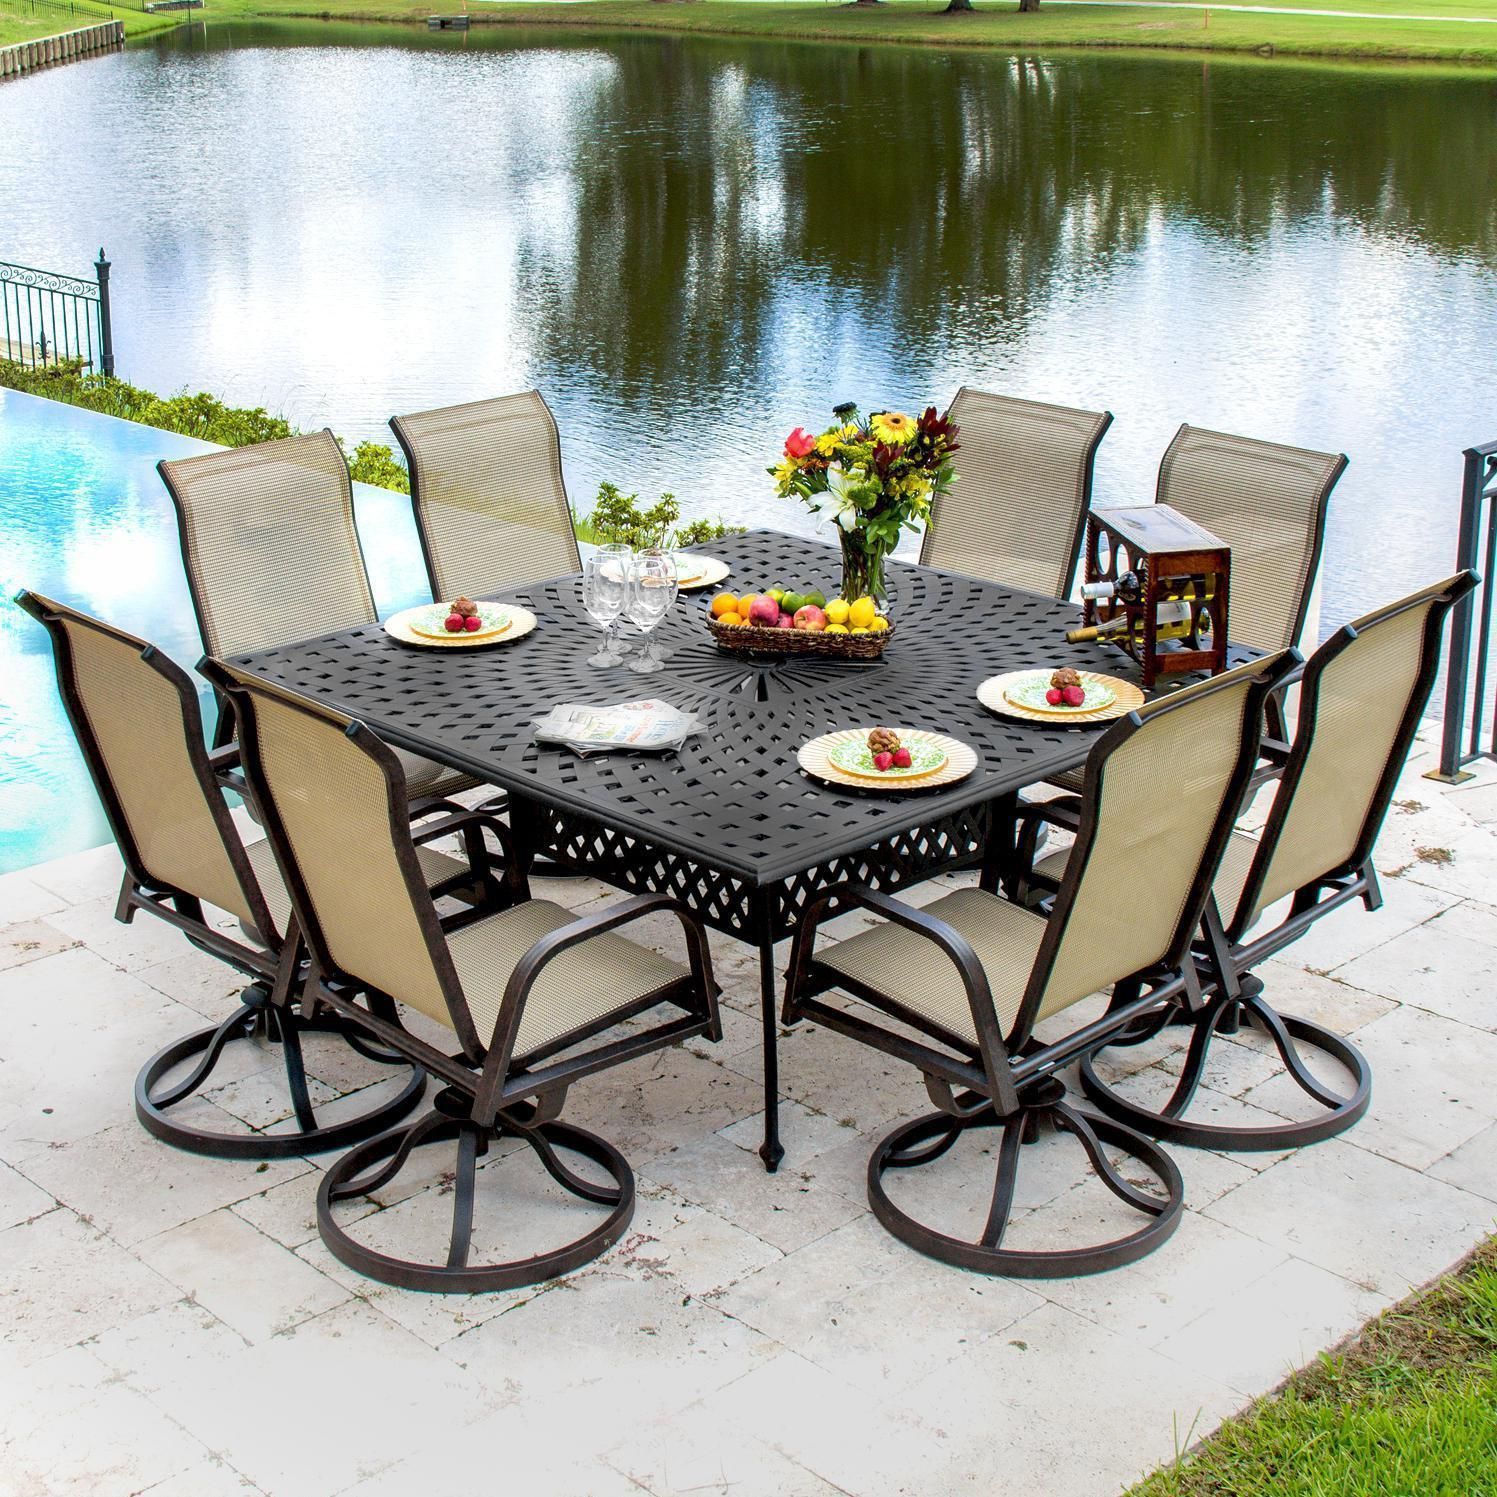 Madison Bay 9 Piece Sling Patio Dining Set With Swivel Rockers And Intended For 9 Piece Teak Outdoor Square Dining Sets (View 14 of 15)